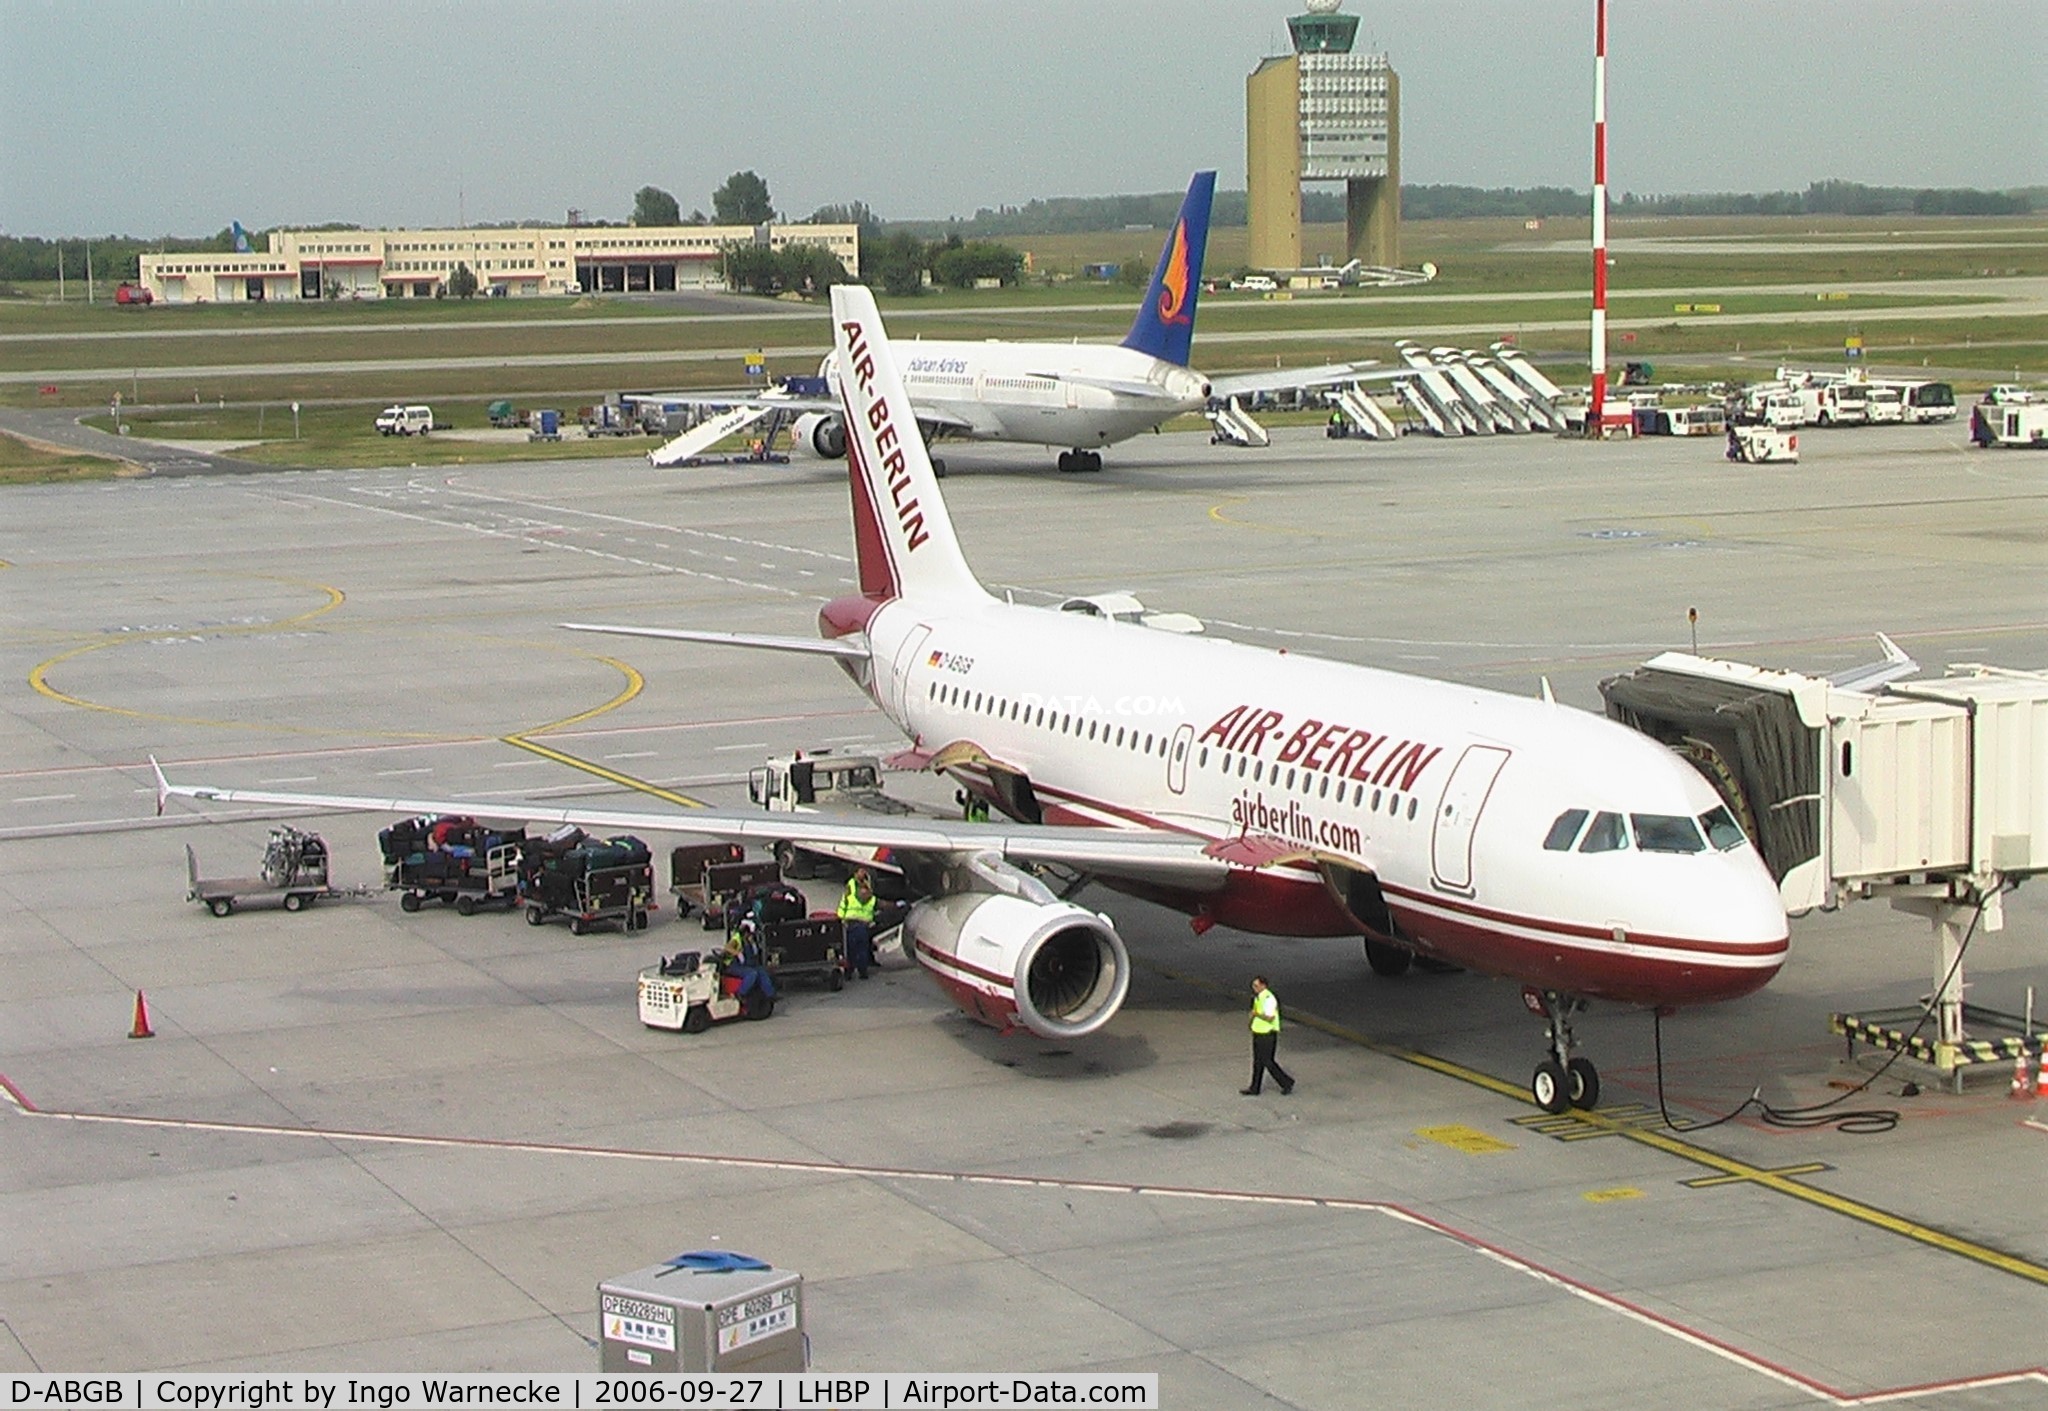 D-ABGB, 2005 Airbus A319-132 C/N 2467, Airbus A319-132 of Air Berlin at Ferihegy airport, Budapest